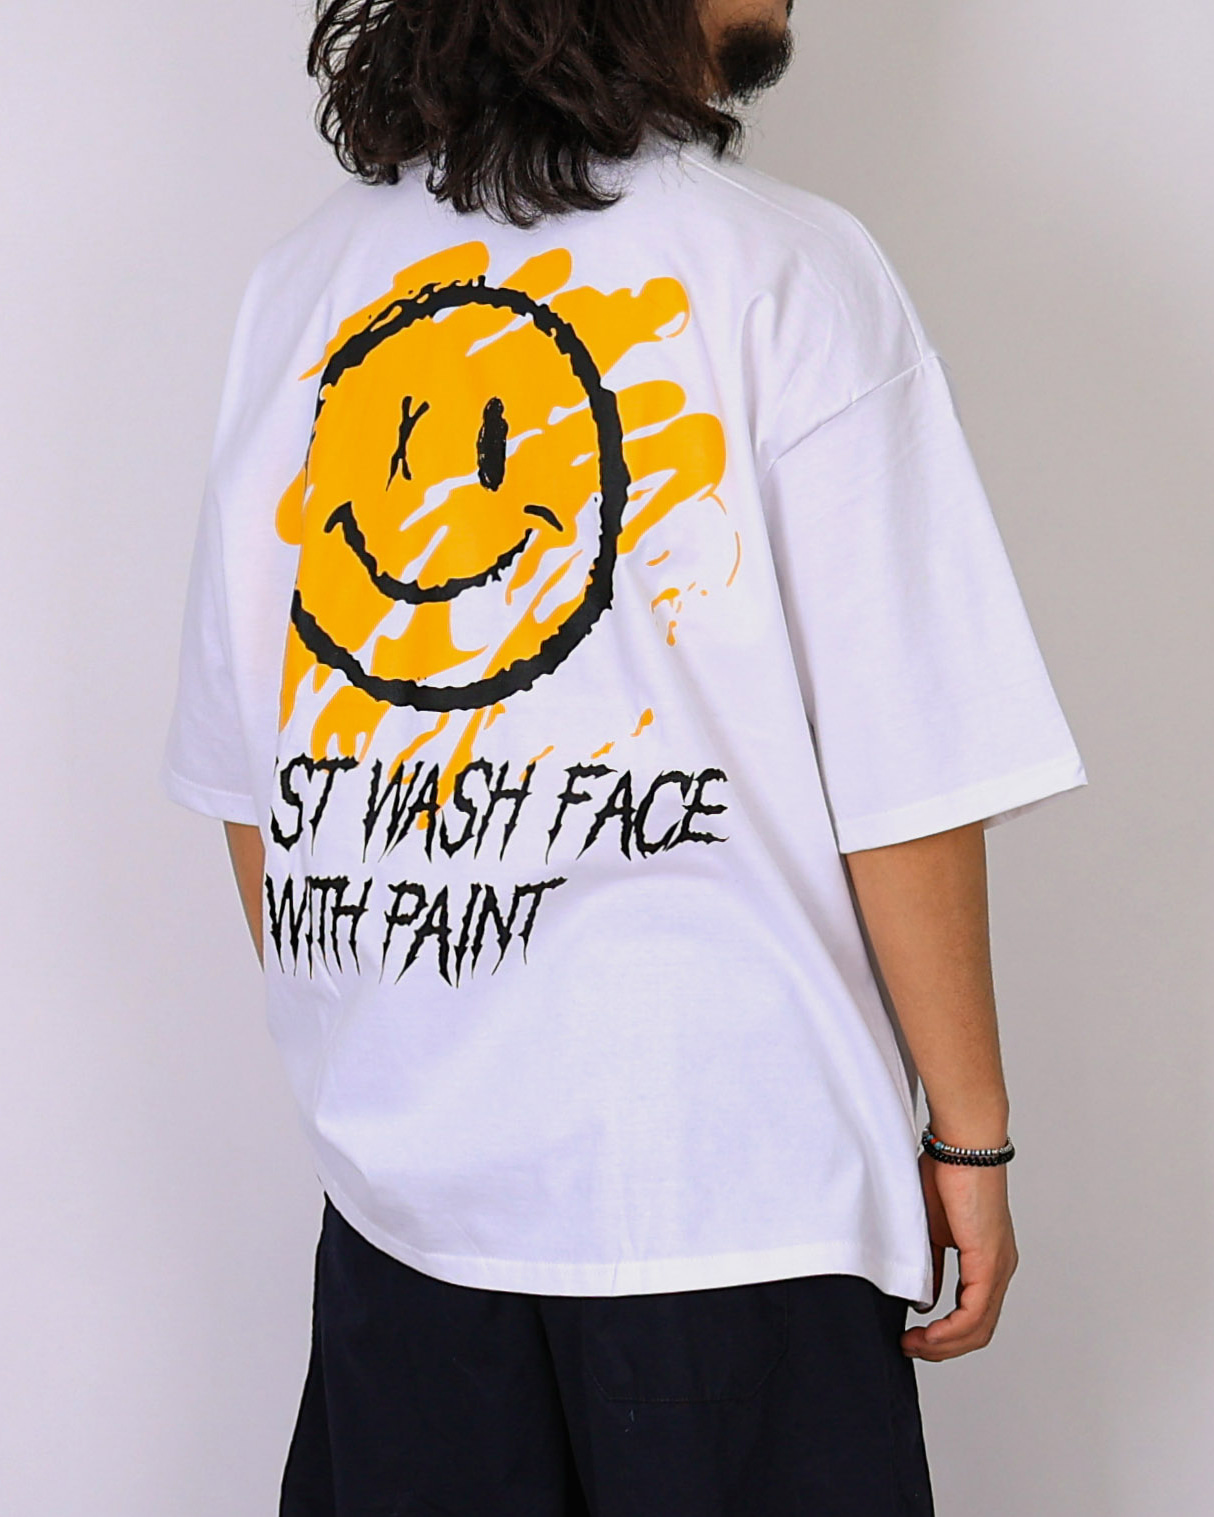 Painted Smile Artist T-Shirts (Black/Ivory)